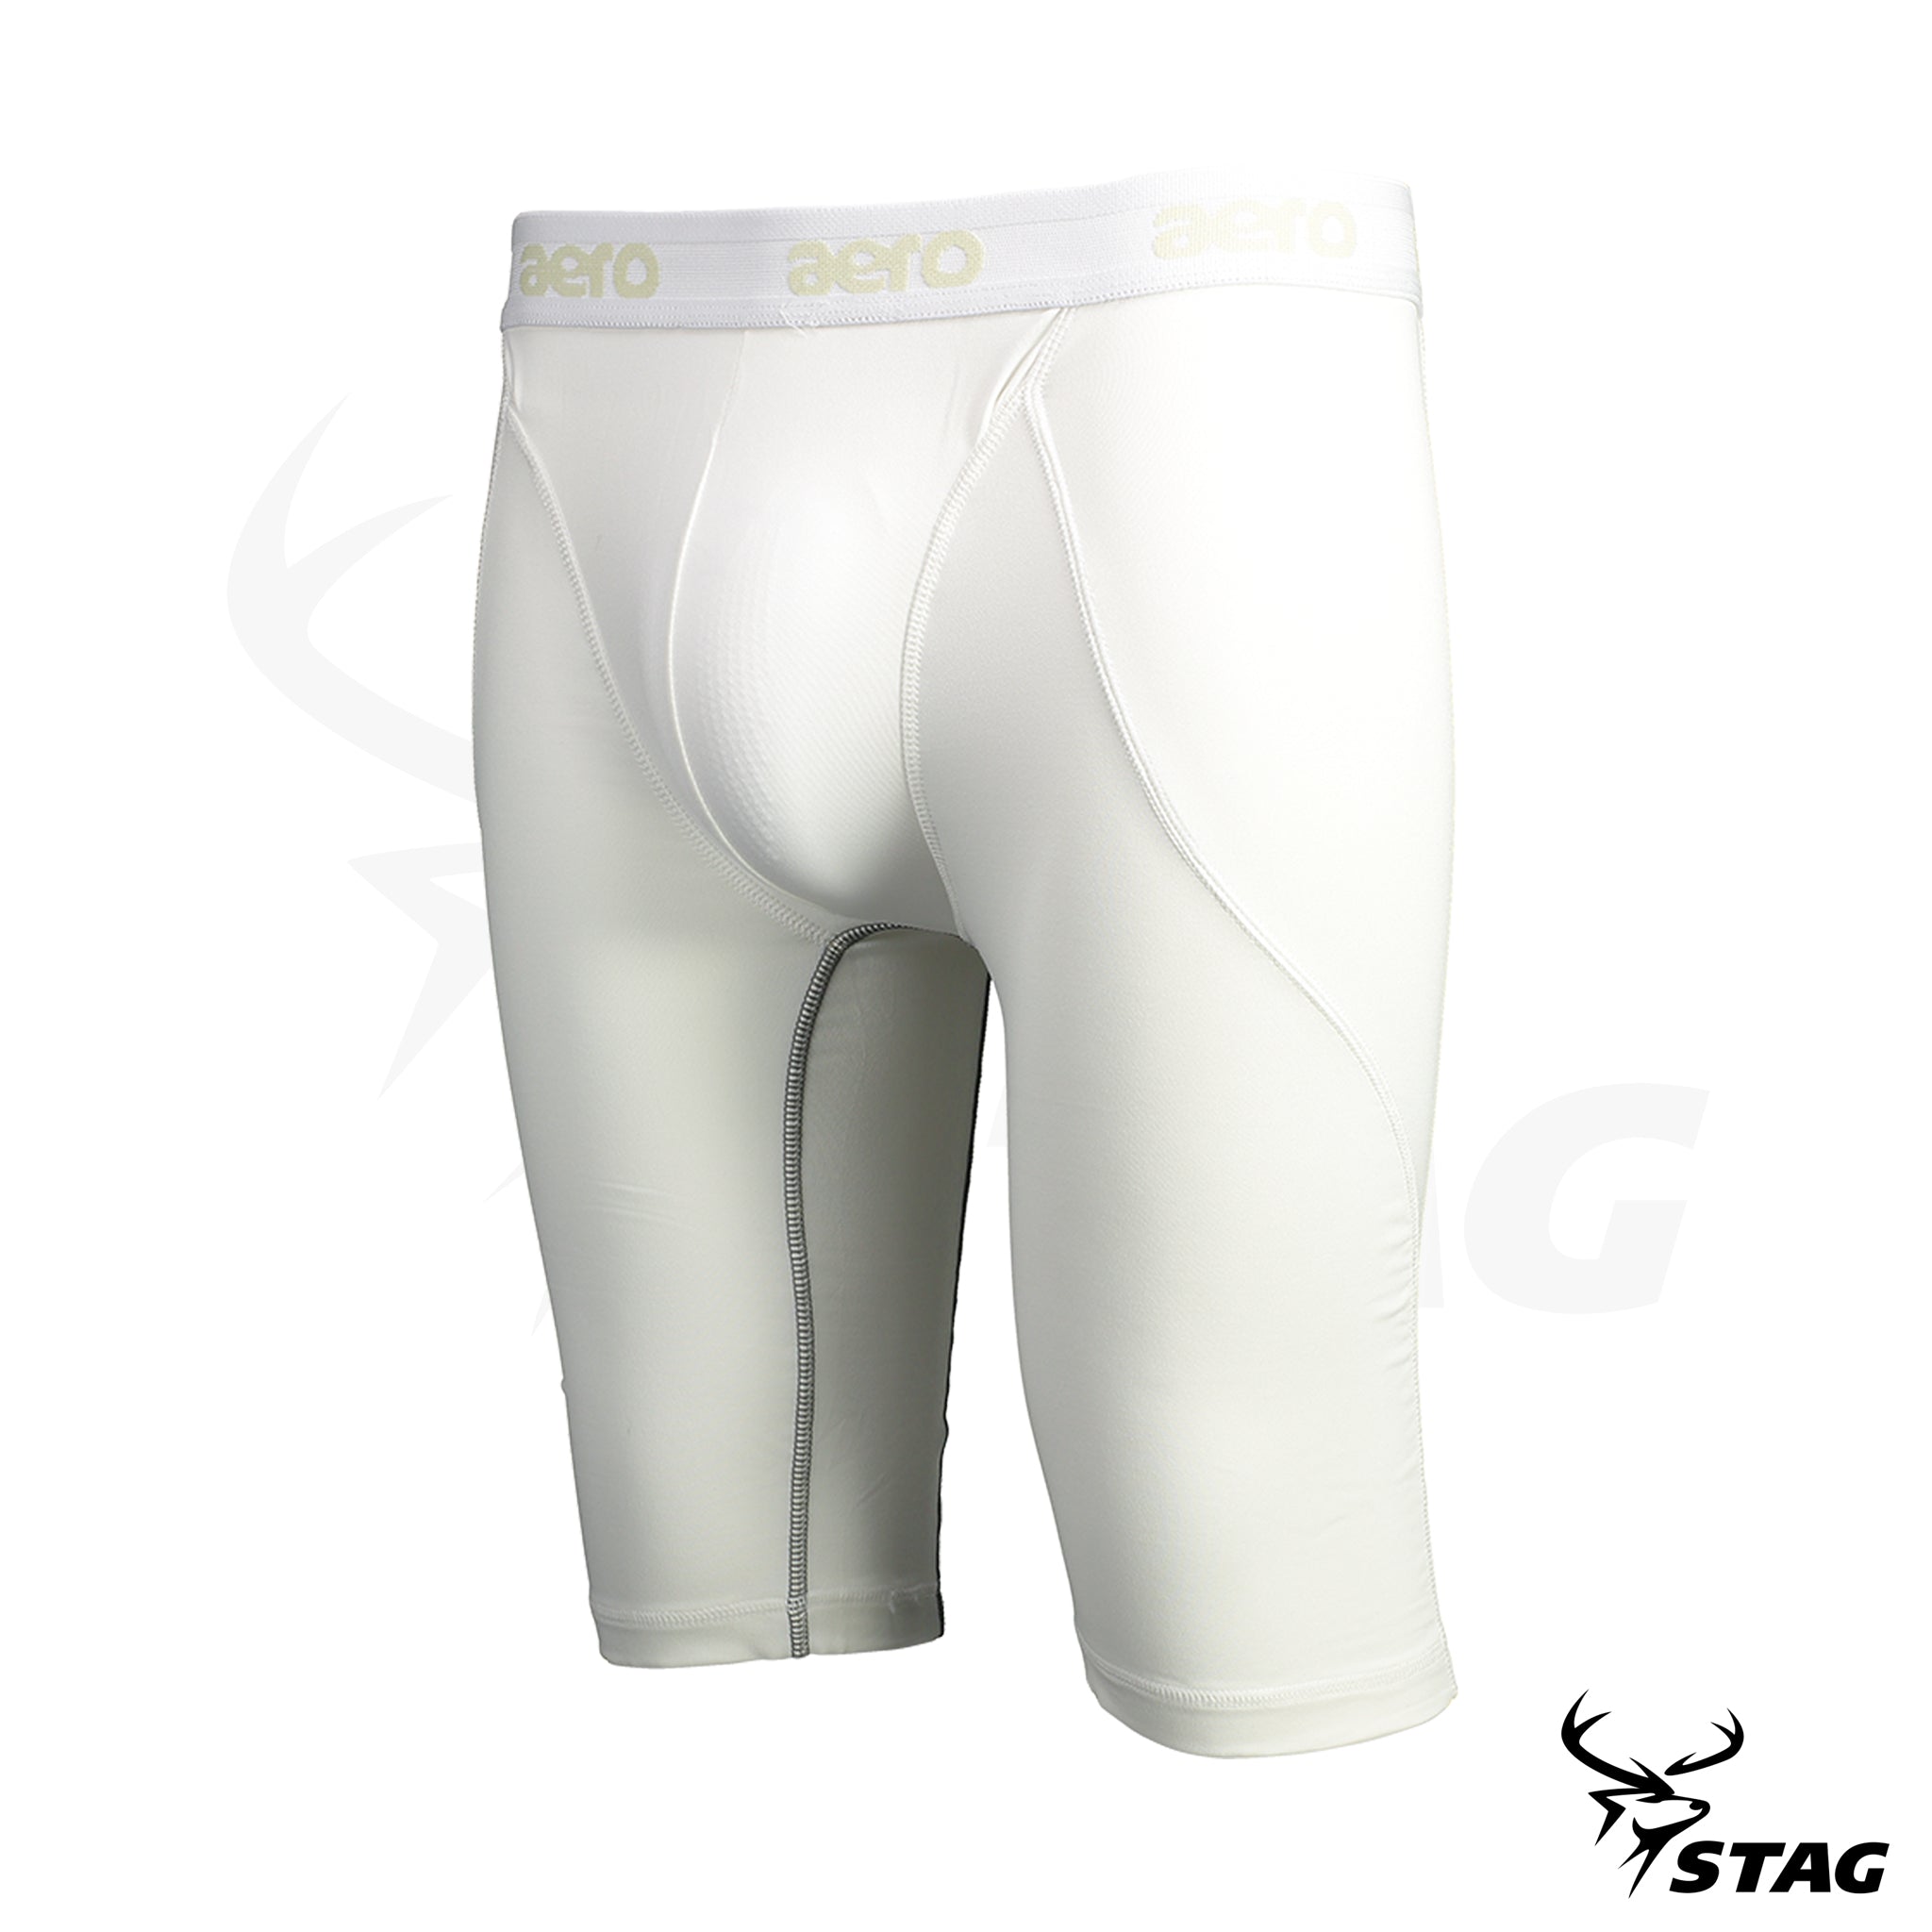 AERO GROIN PROTECTOR SHORTS - Stag Sports